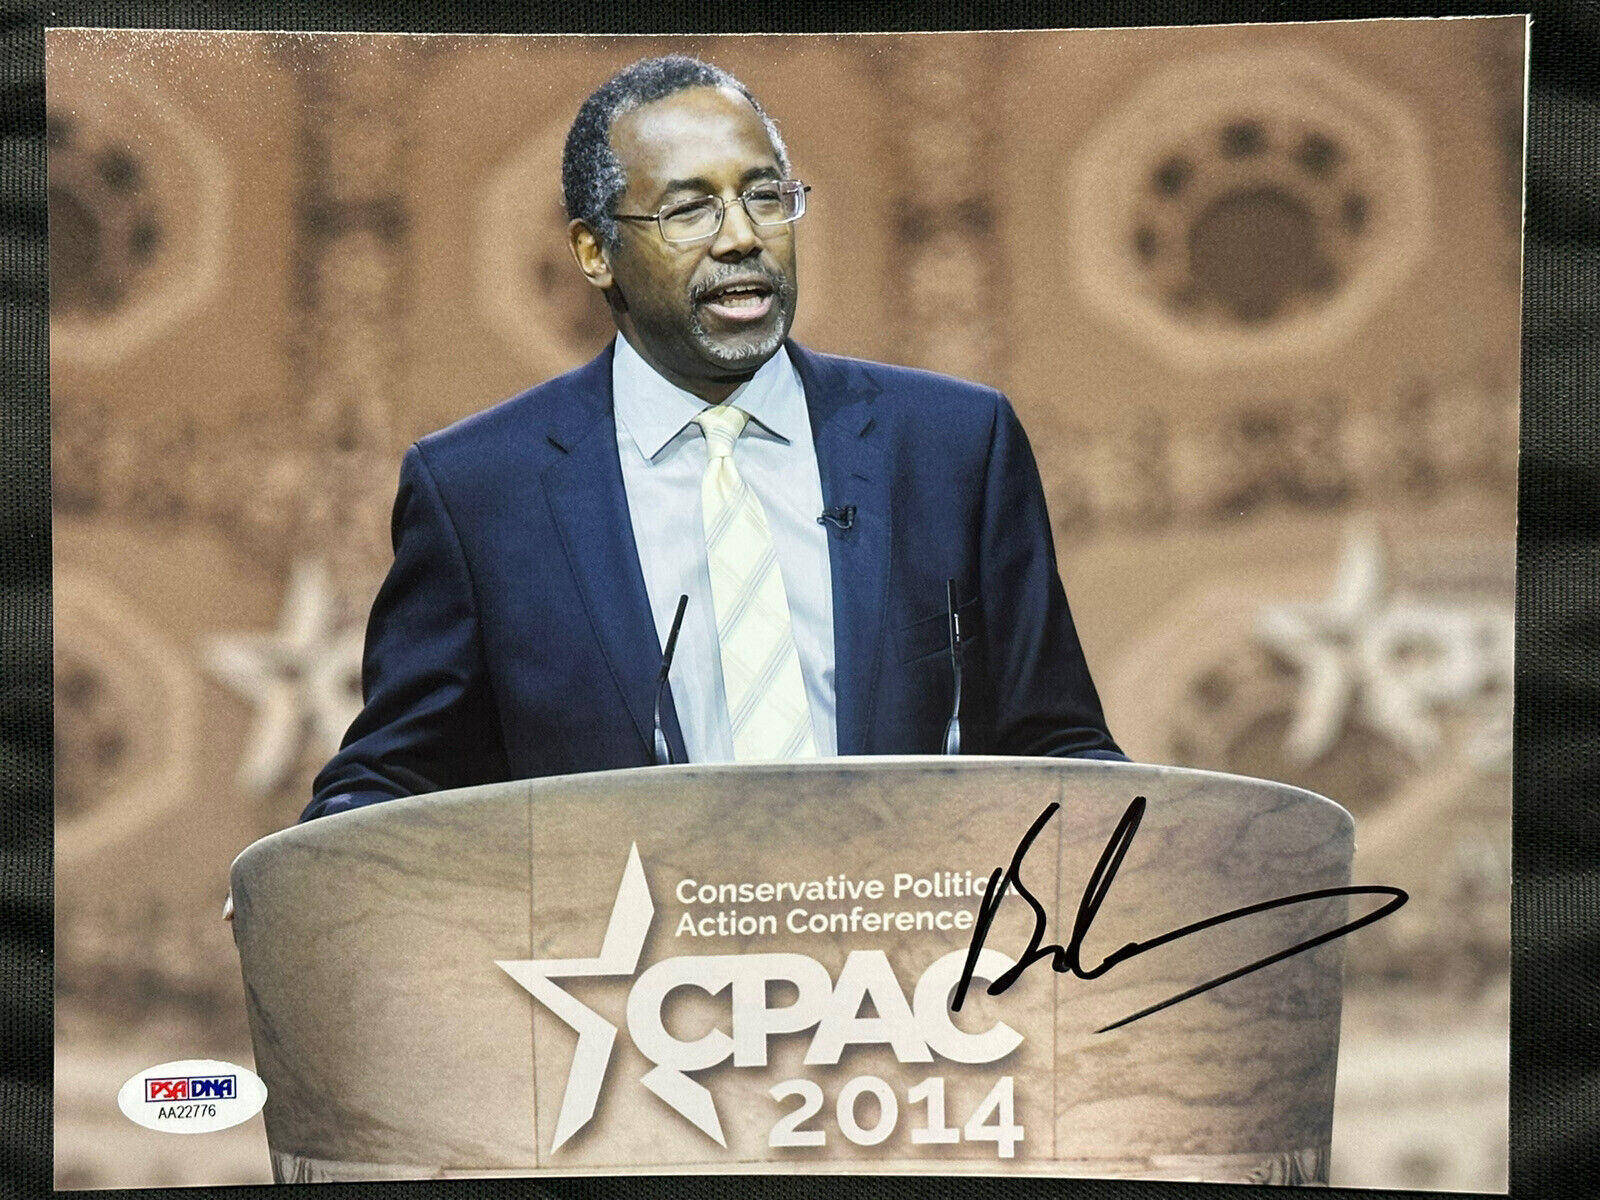 BEN CARSON HAND SIGNED AUTOGRAPHED 8x10 PHOTO PSA/DNA CERTIFIED 